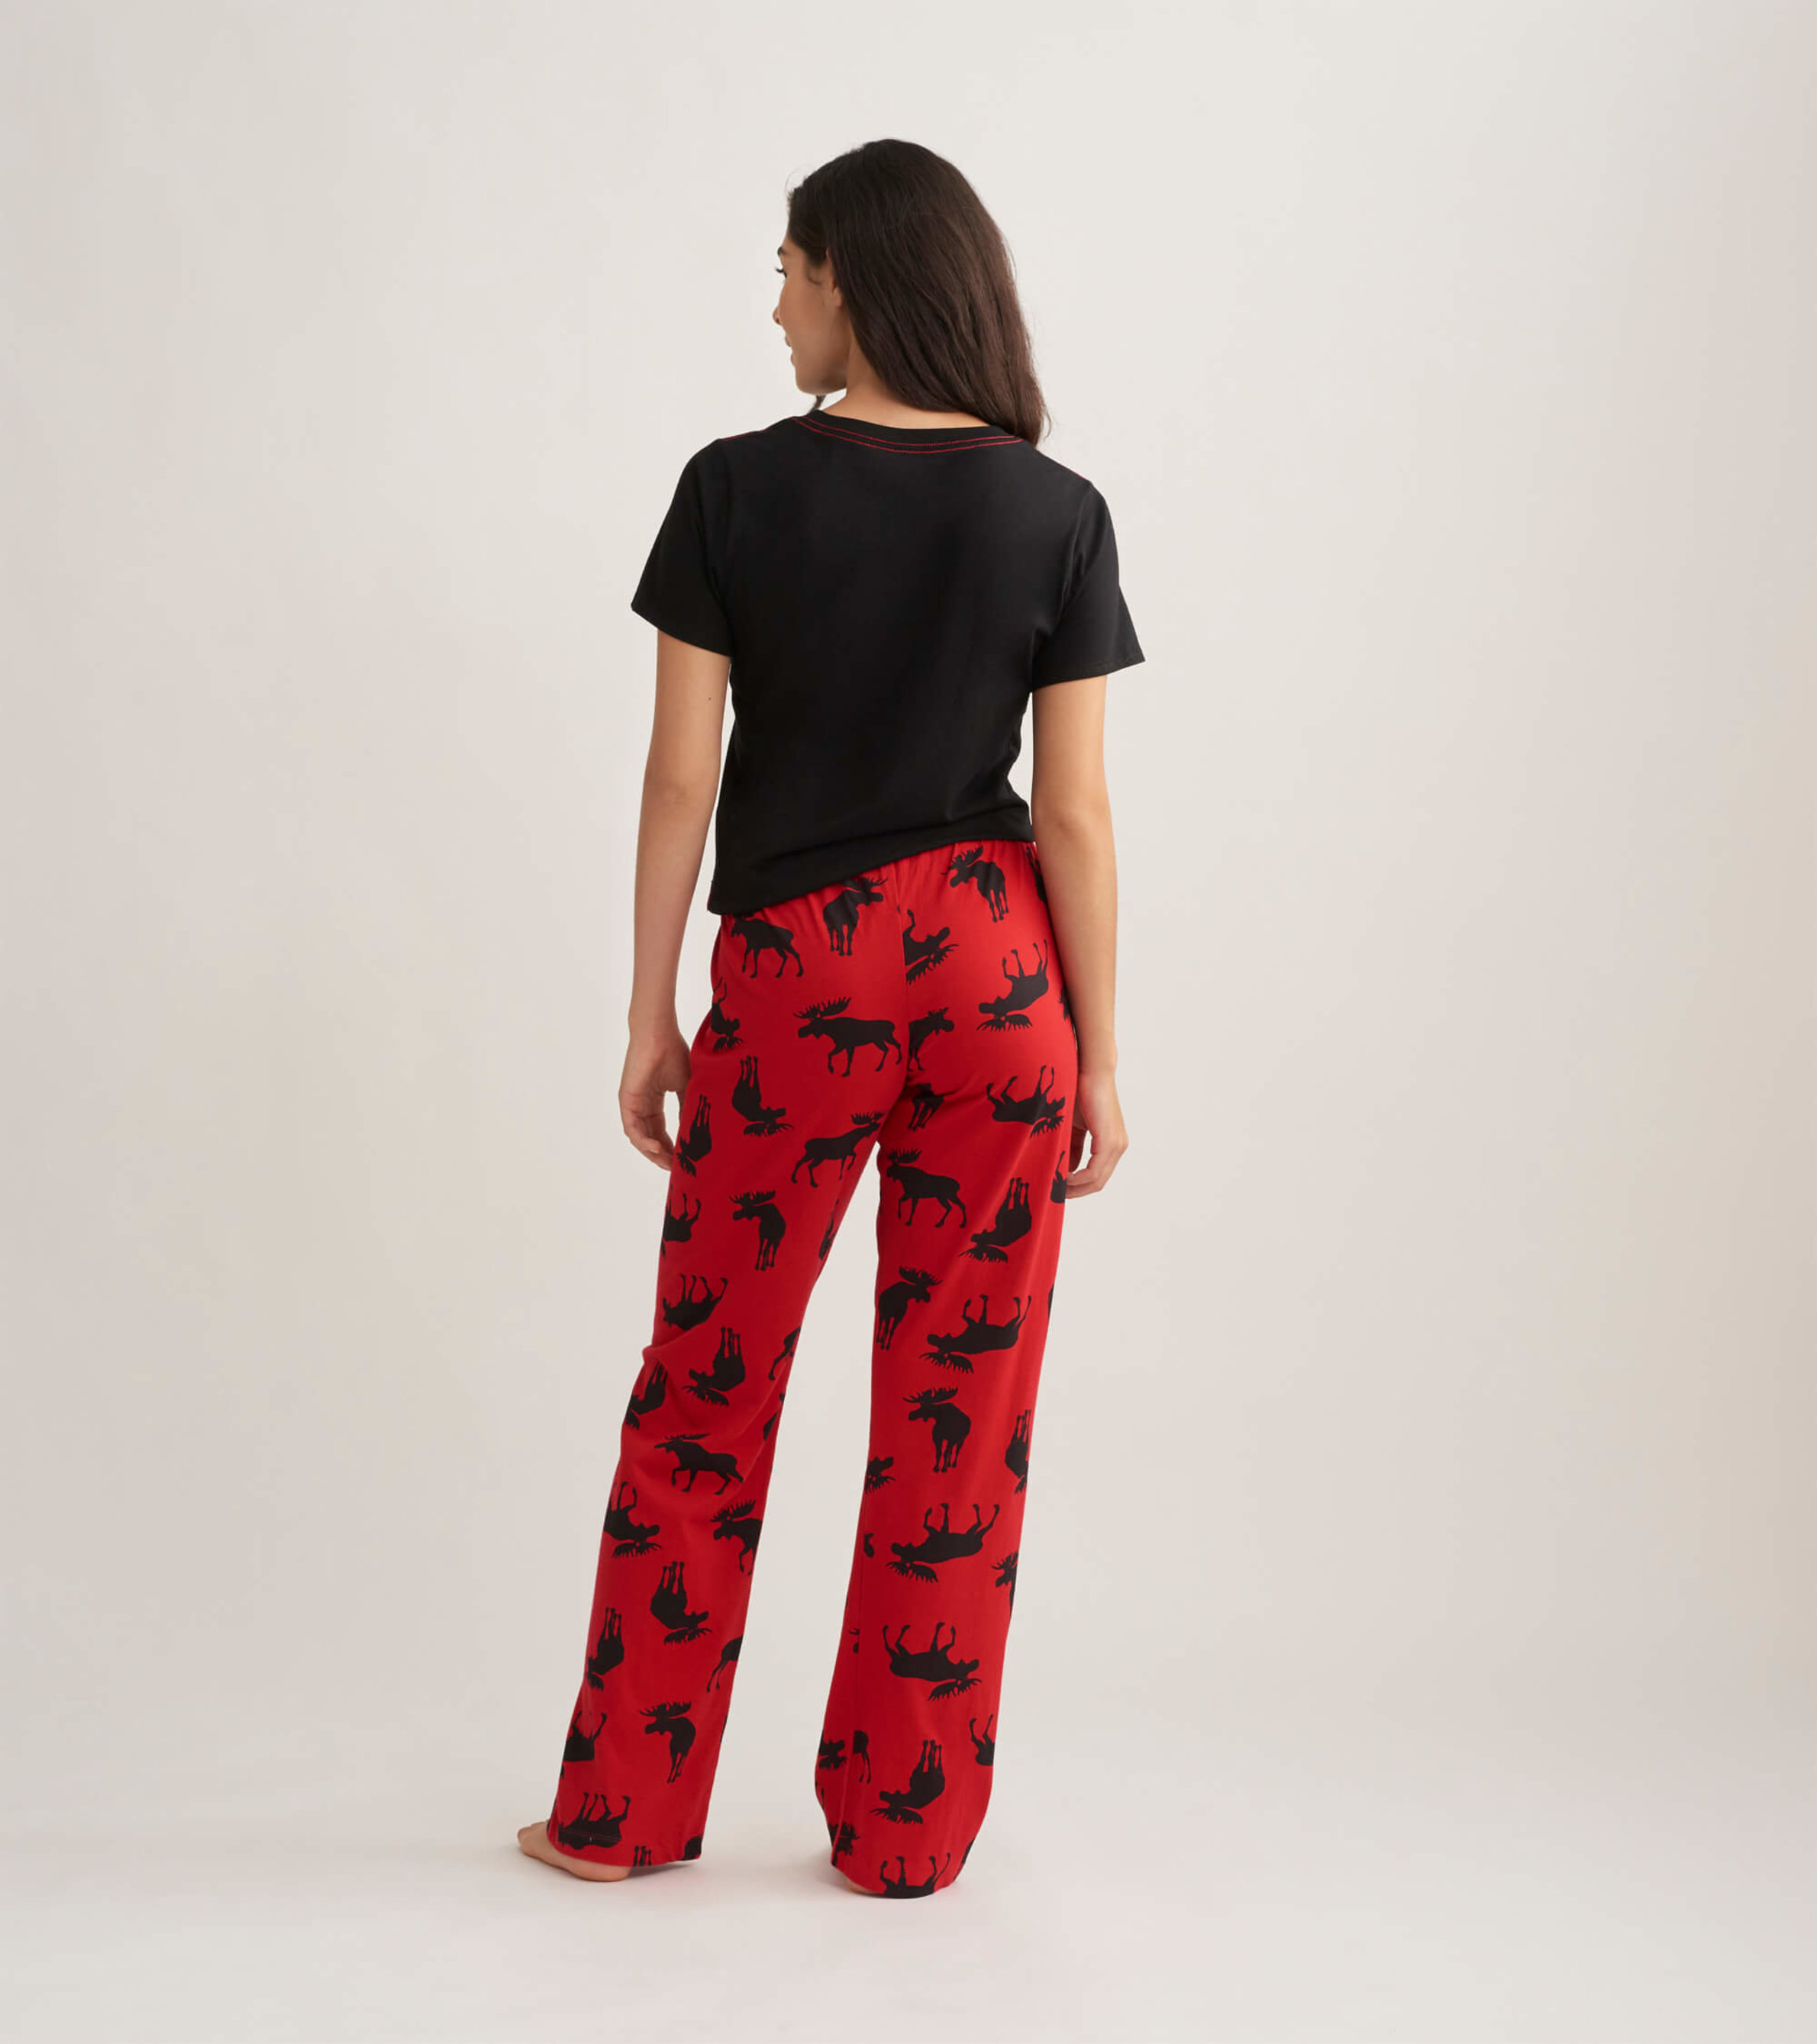 https://cdn.littlebluehouse.com/product_images/moose-on-red-womens-jersey-pajama-pants/PA2WIMO001_B_jpg/pdp_zoom.jpg?c=1604493259&locale=us_en